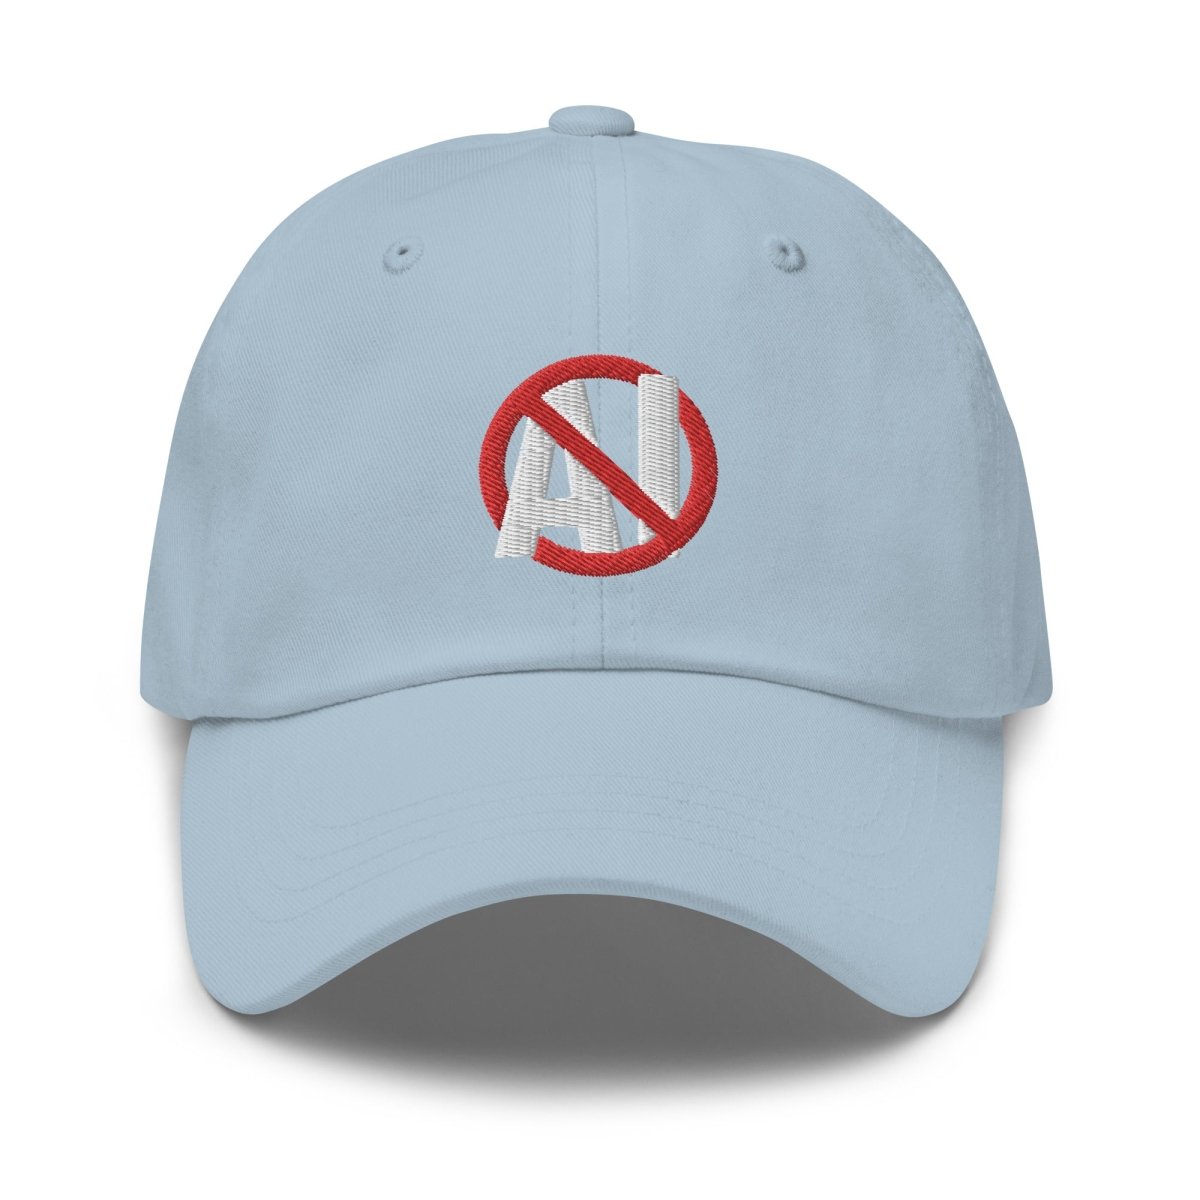 Stop AI Embroidered Cap - Light Blue - AI Store